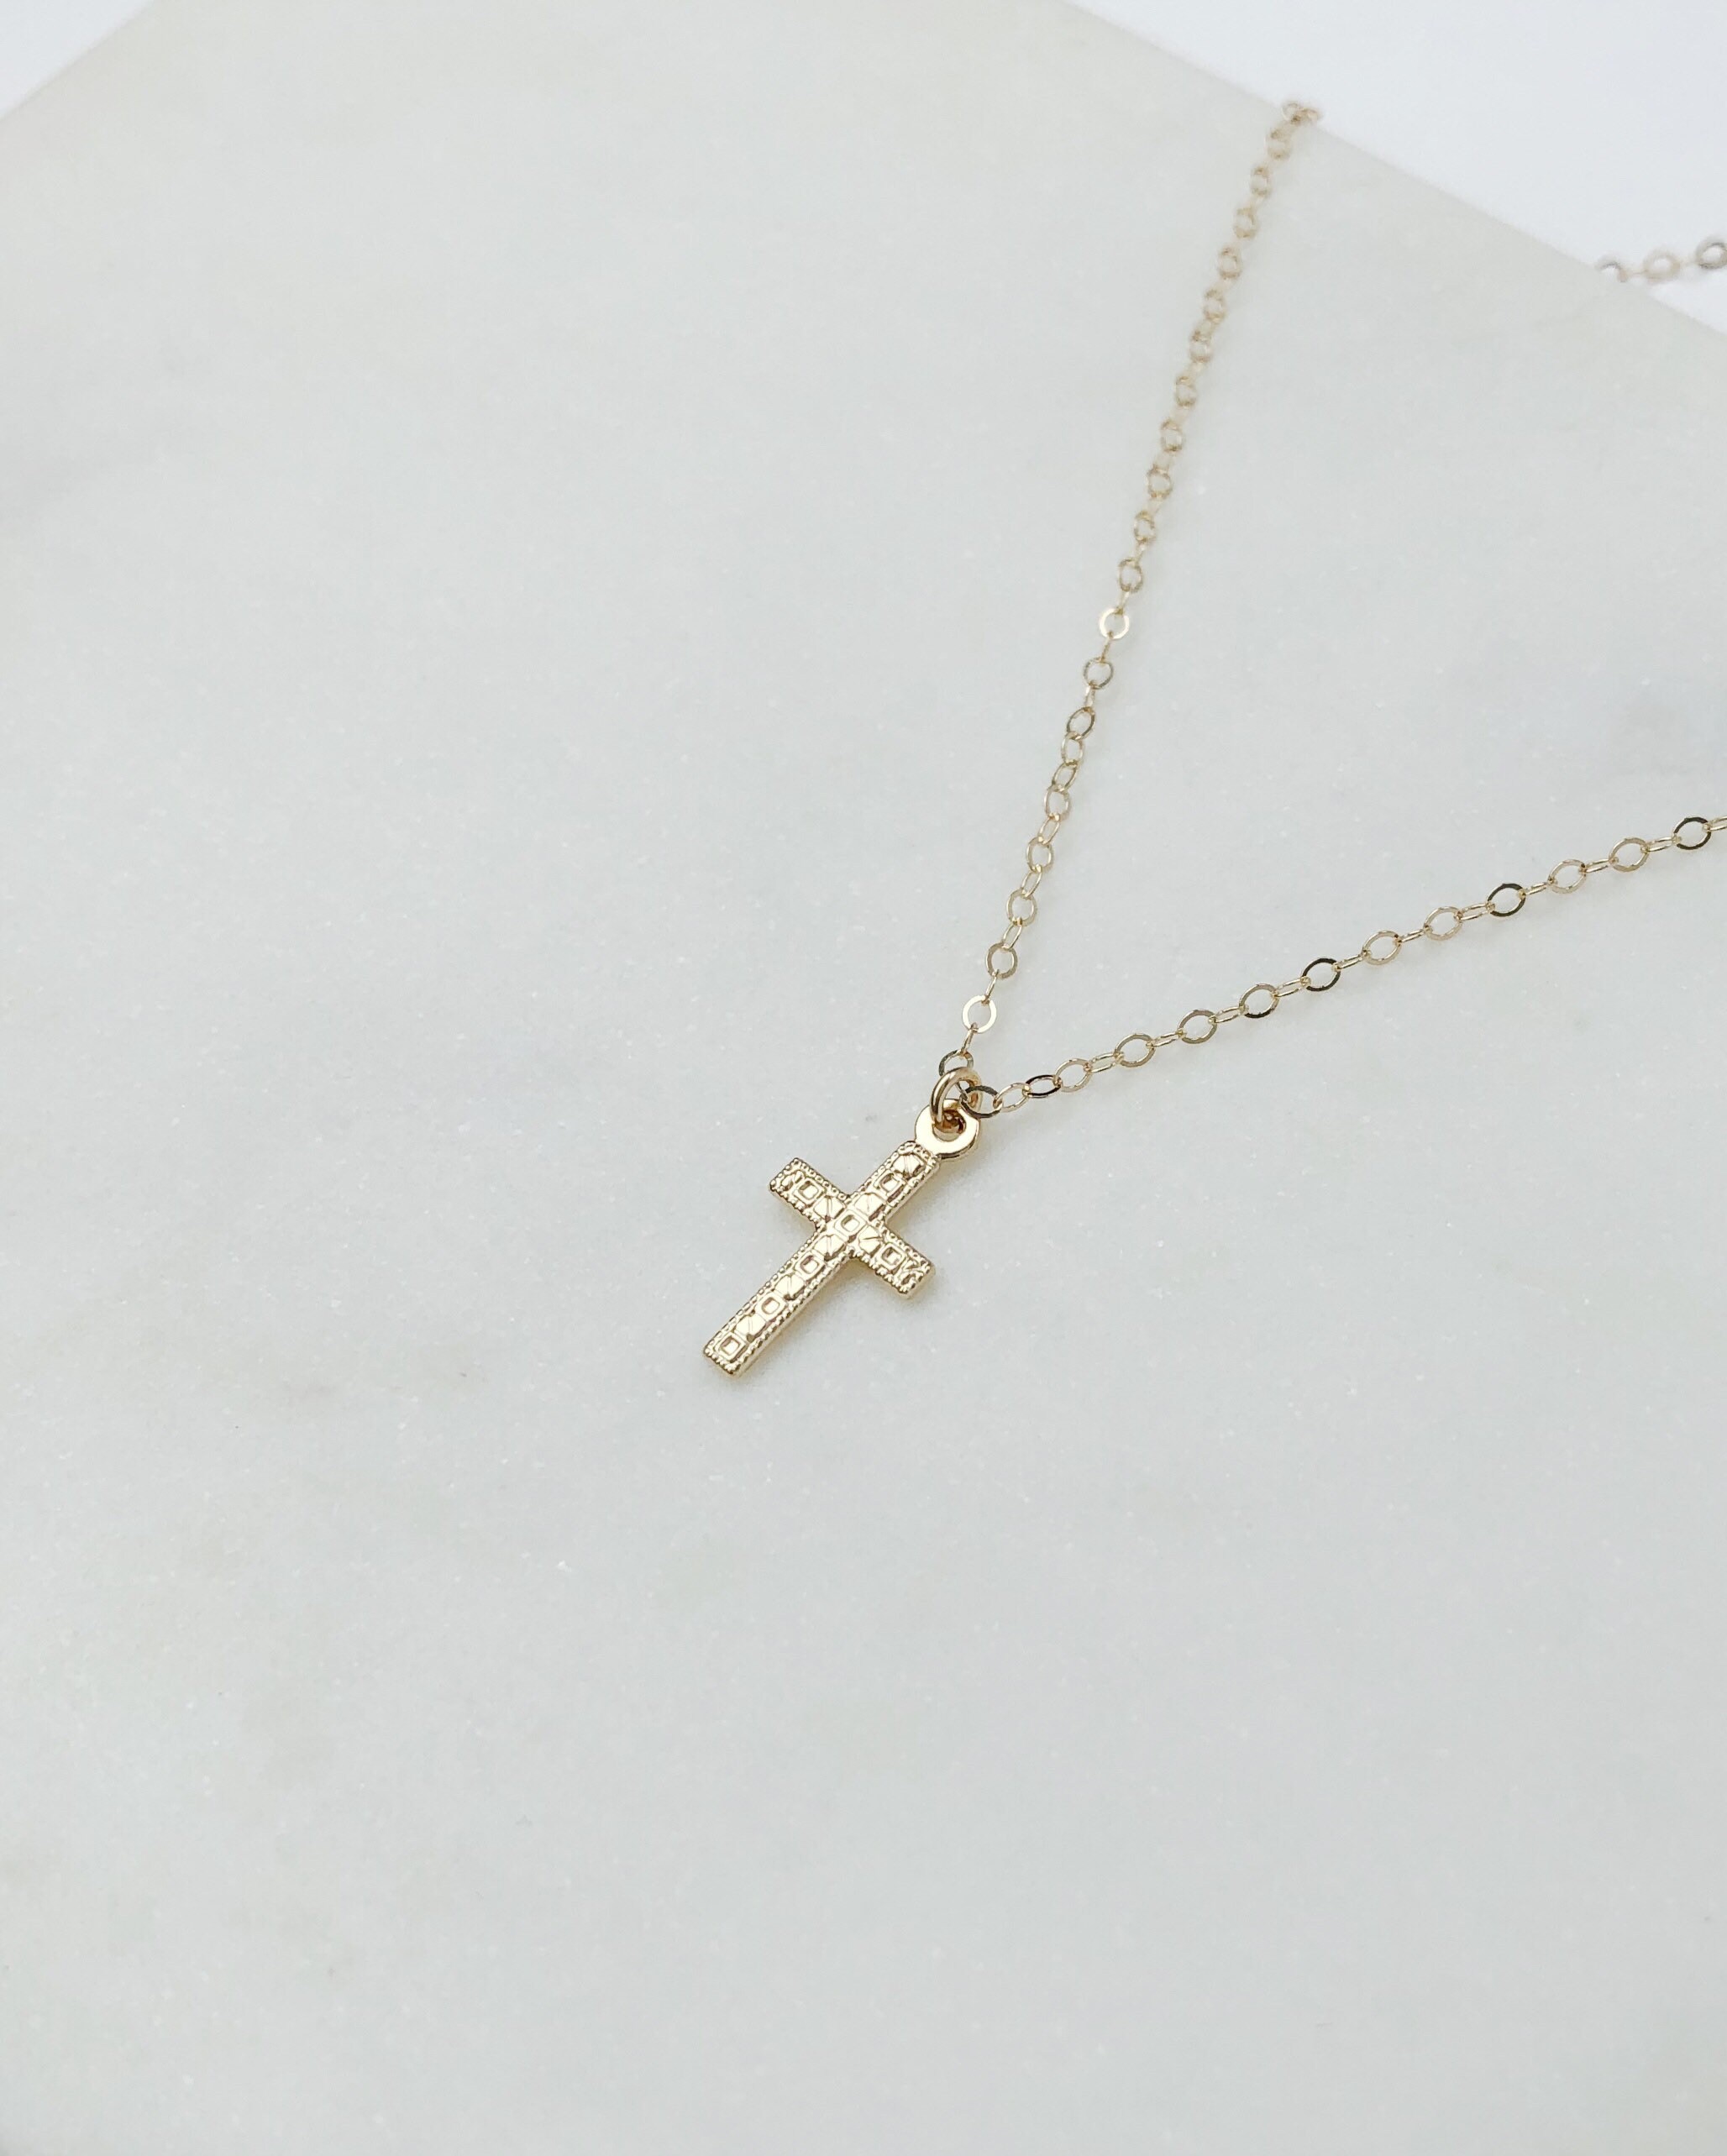 Cross Necklace Sterling Silver Baptism Gift Dainty Jewelry | Etsy